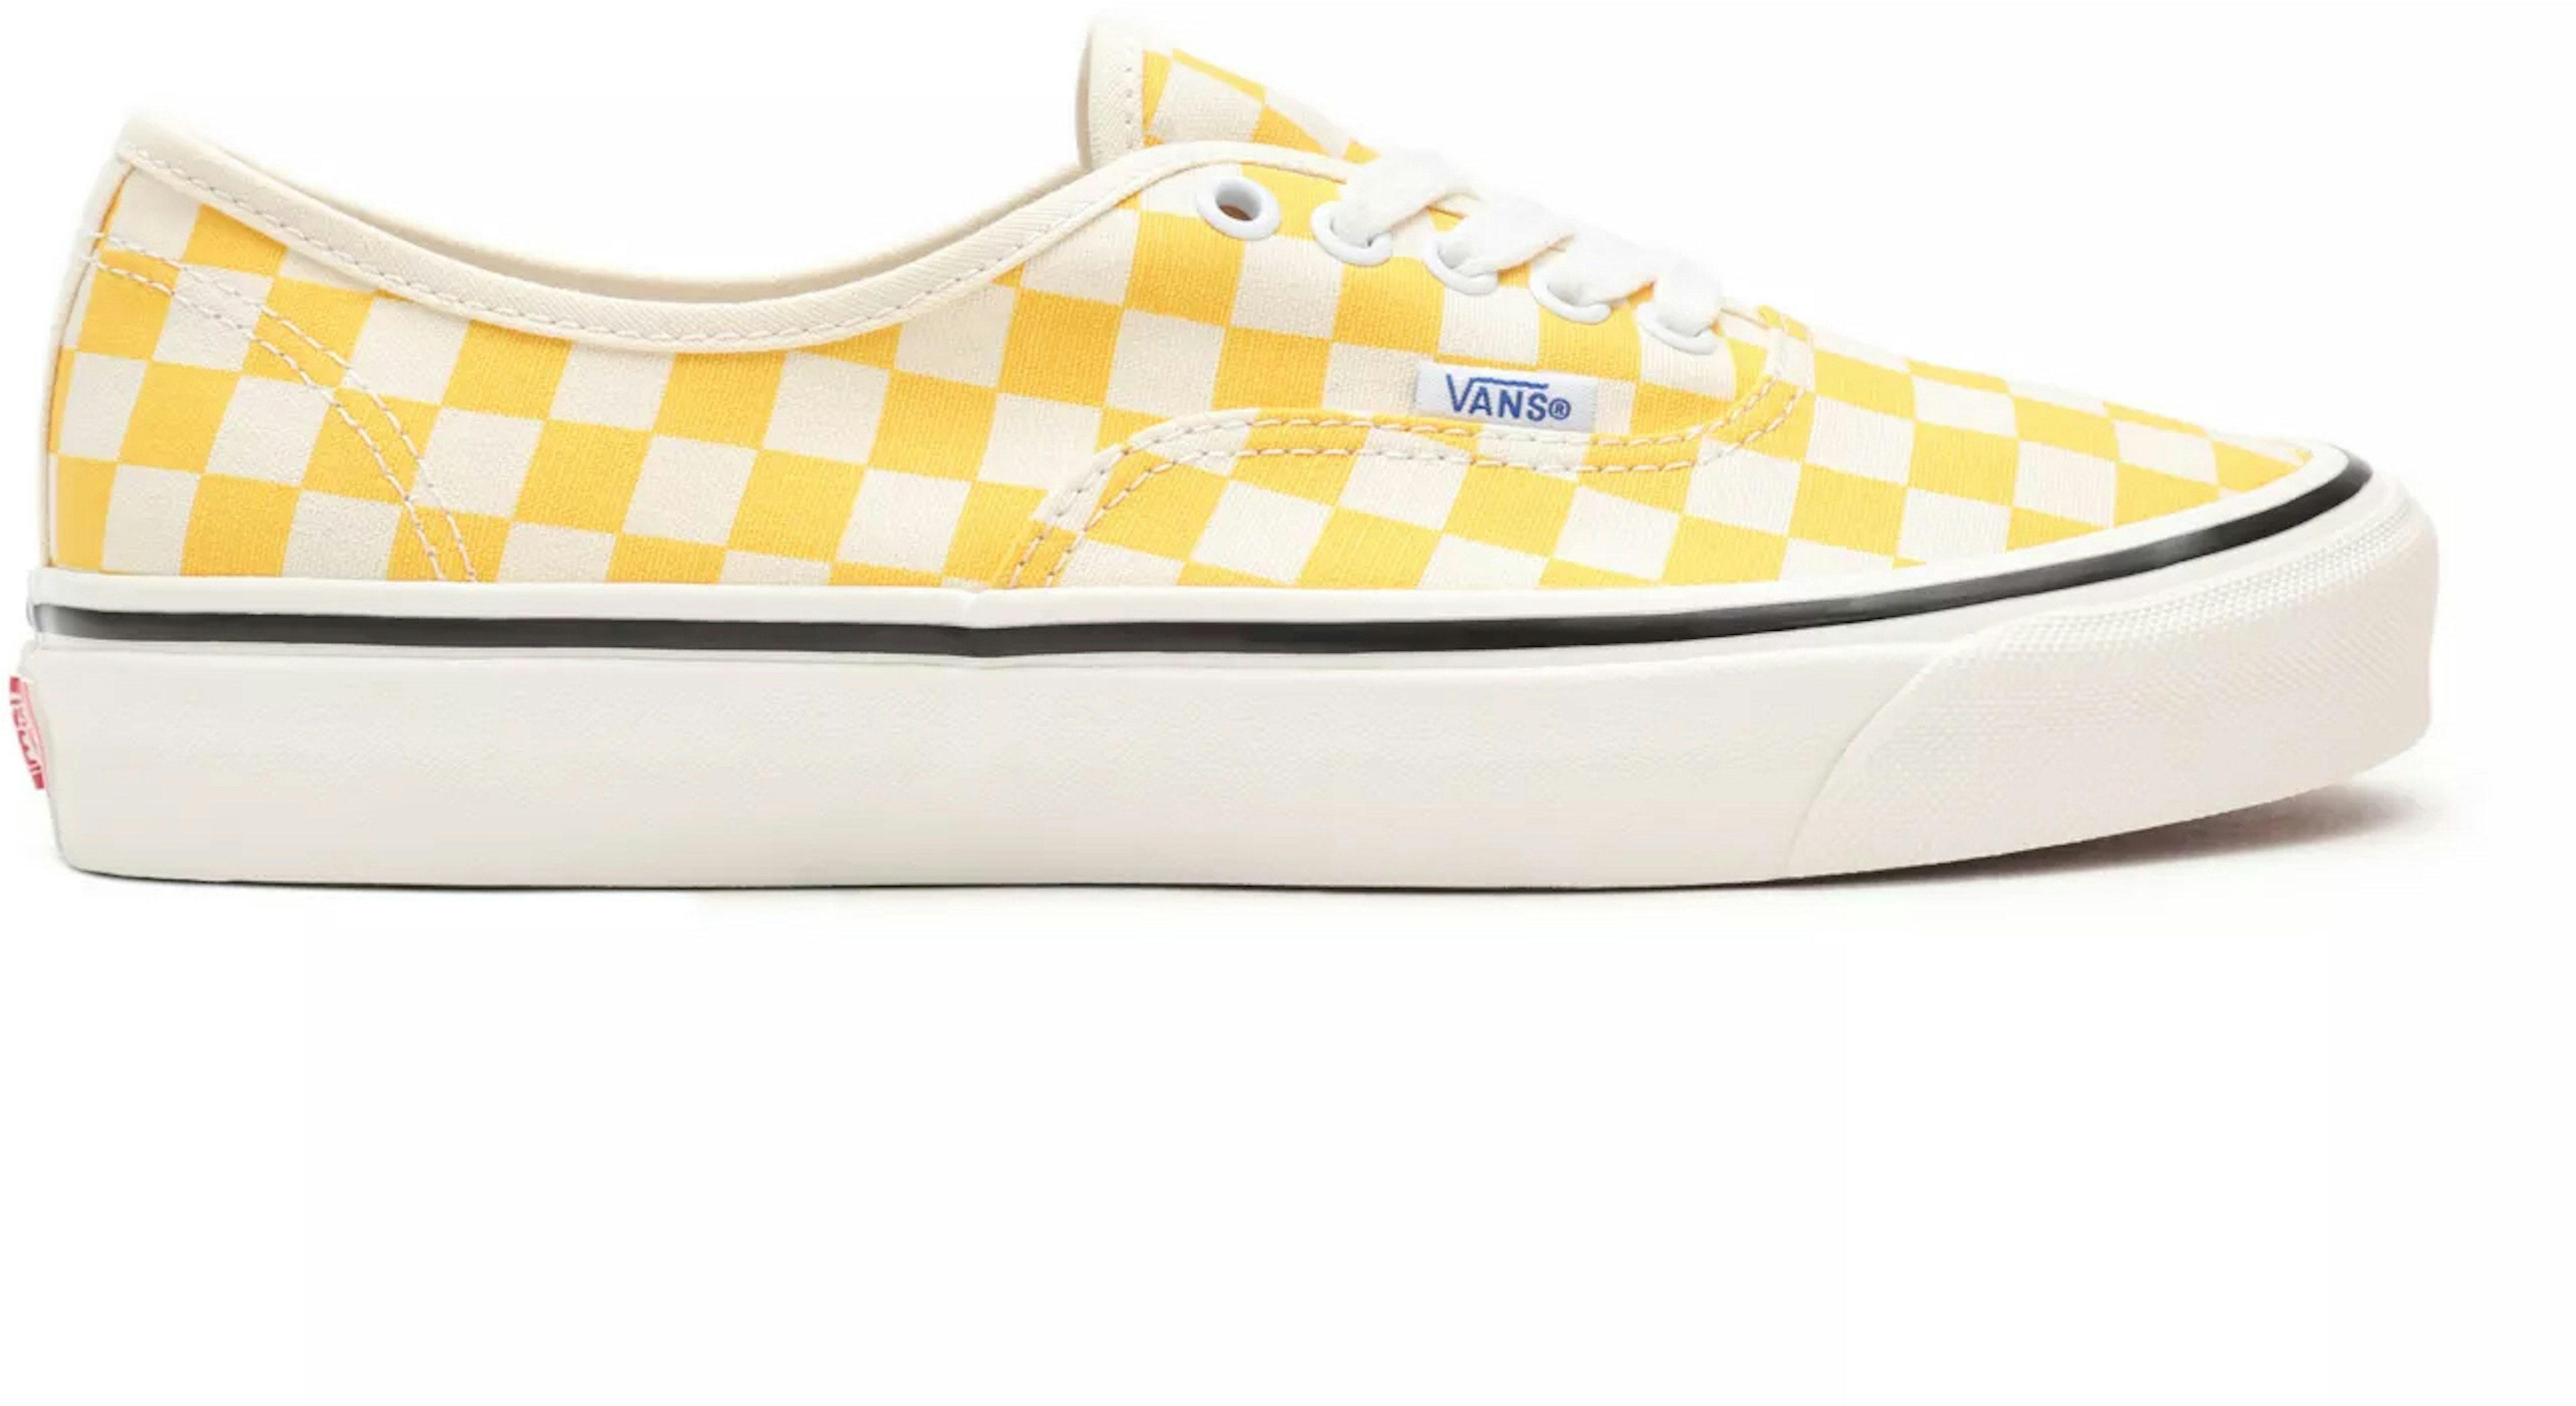 Vans Authentic 44 DX Anaheim Factory Yellow Checkerboard - VN0A54F241P